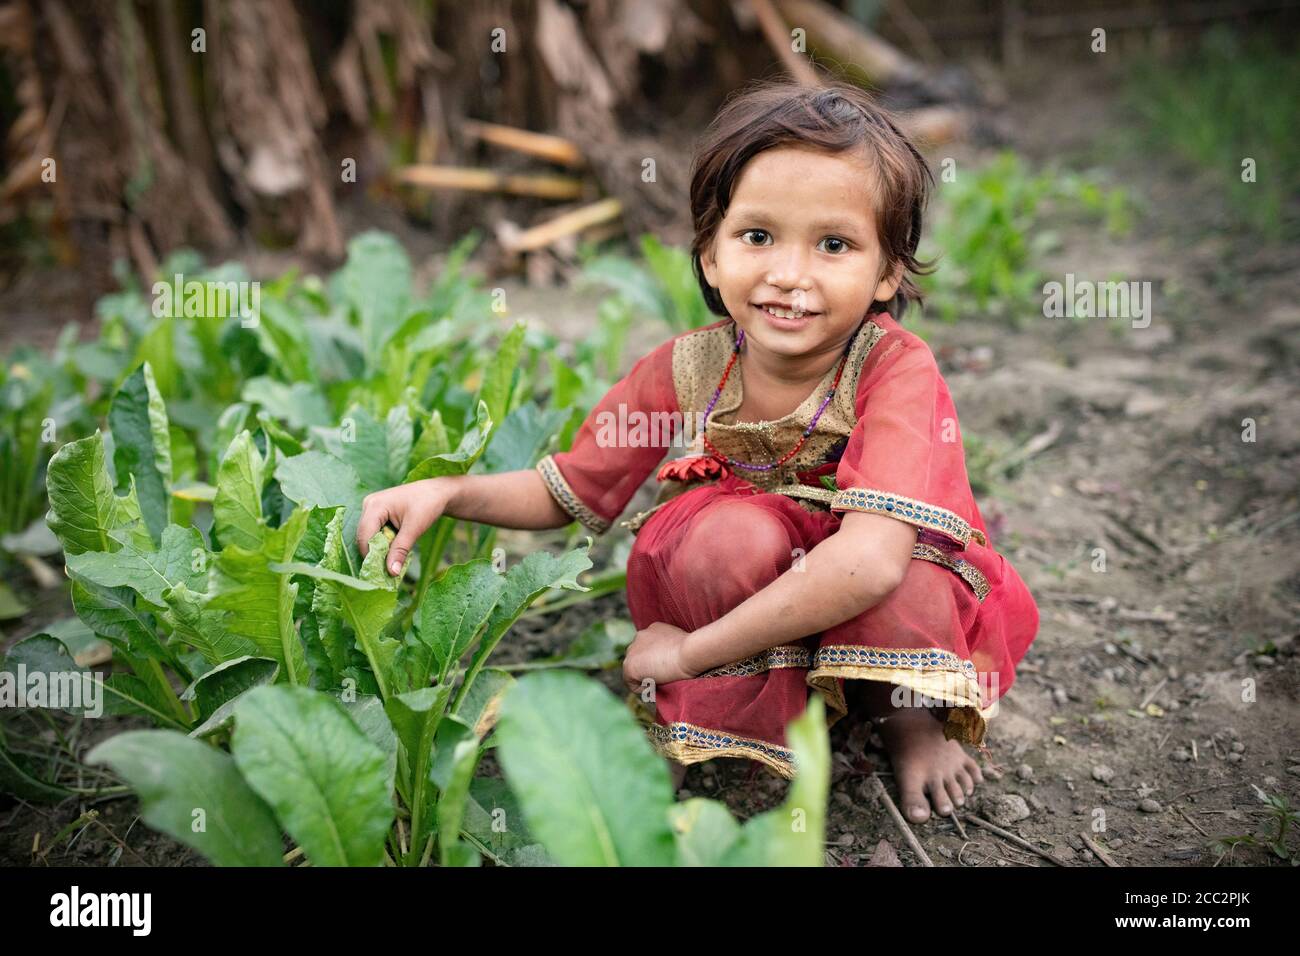 A young girl picks leafy green vegetables in her family's garden in Bihar, India, South Asia. Stock Photo